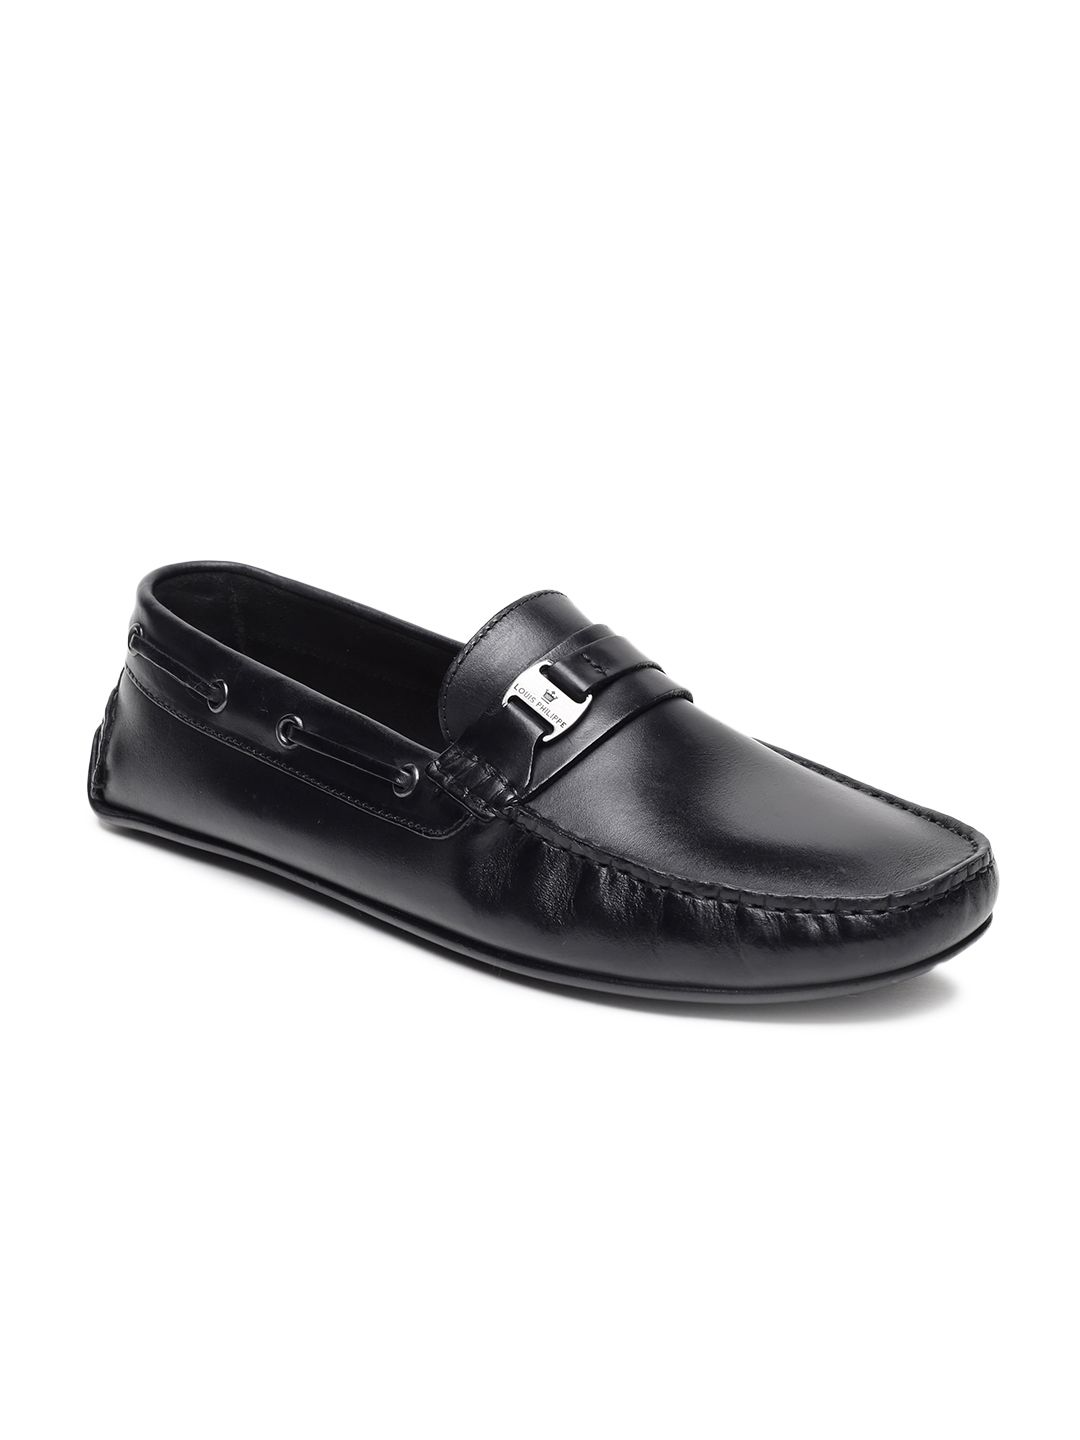 Louis philippe shoes india. Louis Philippe Official Online Store, Buy Louis Philippe Clothes and ...